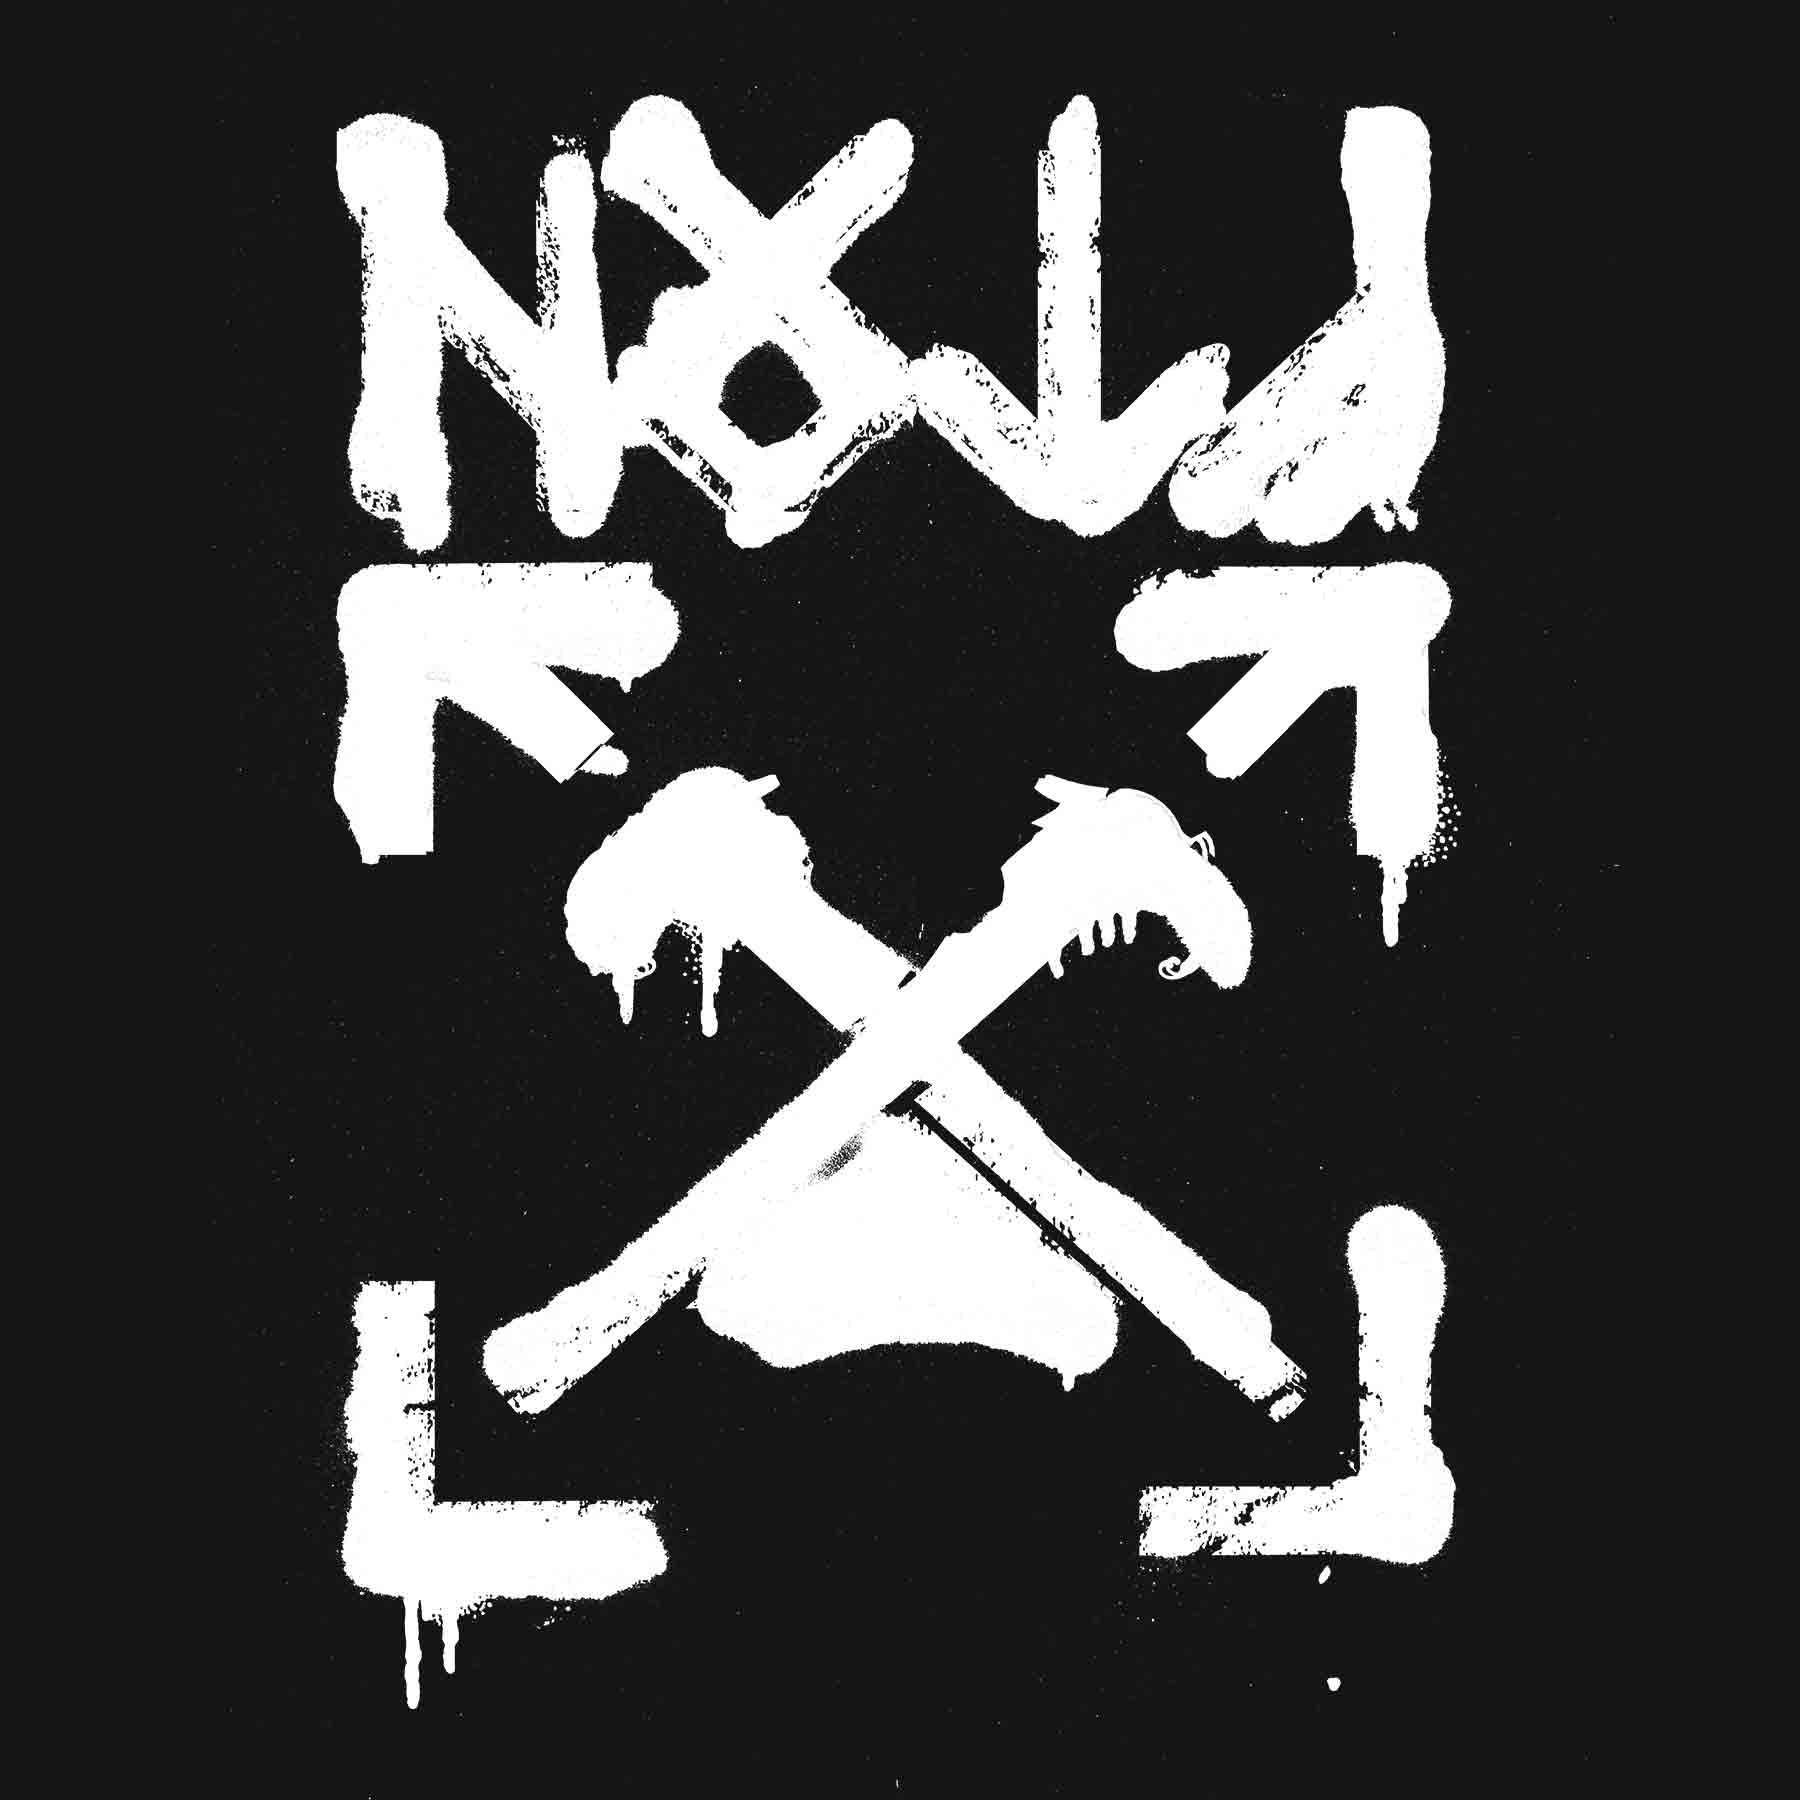 Parody of high-fashion Off-White design featuring reversed HOTF runes and a crossed dragon heads logo, hand-sprayed on a square layout.